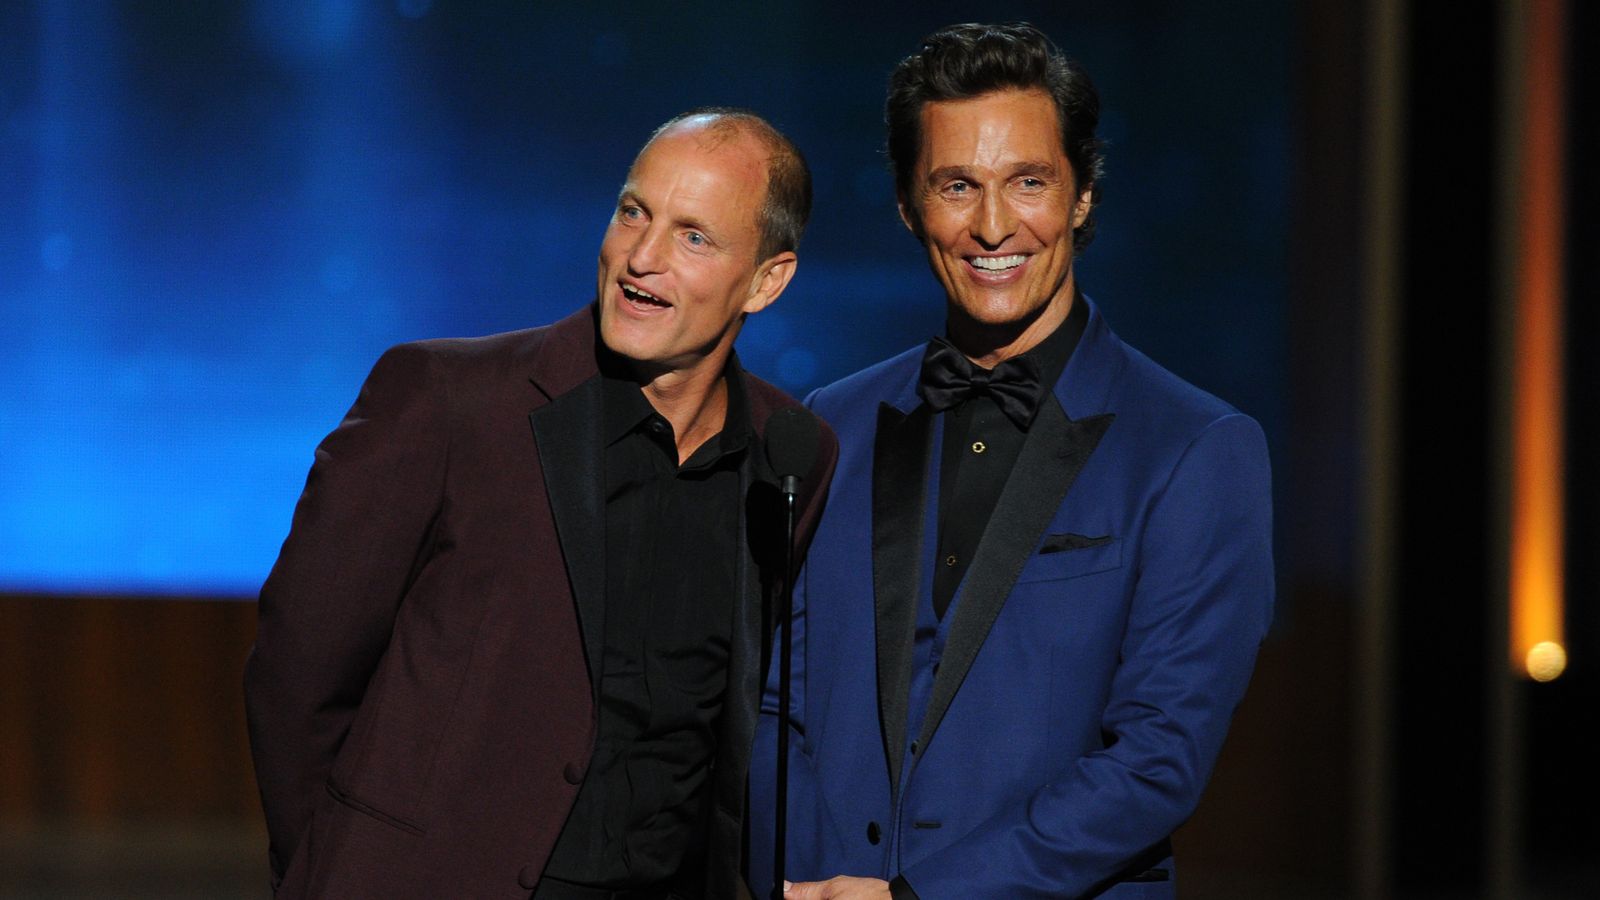 Matthew McConaughey says True Detective co-star Woody Harrelson could be his half-brother 